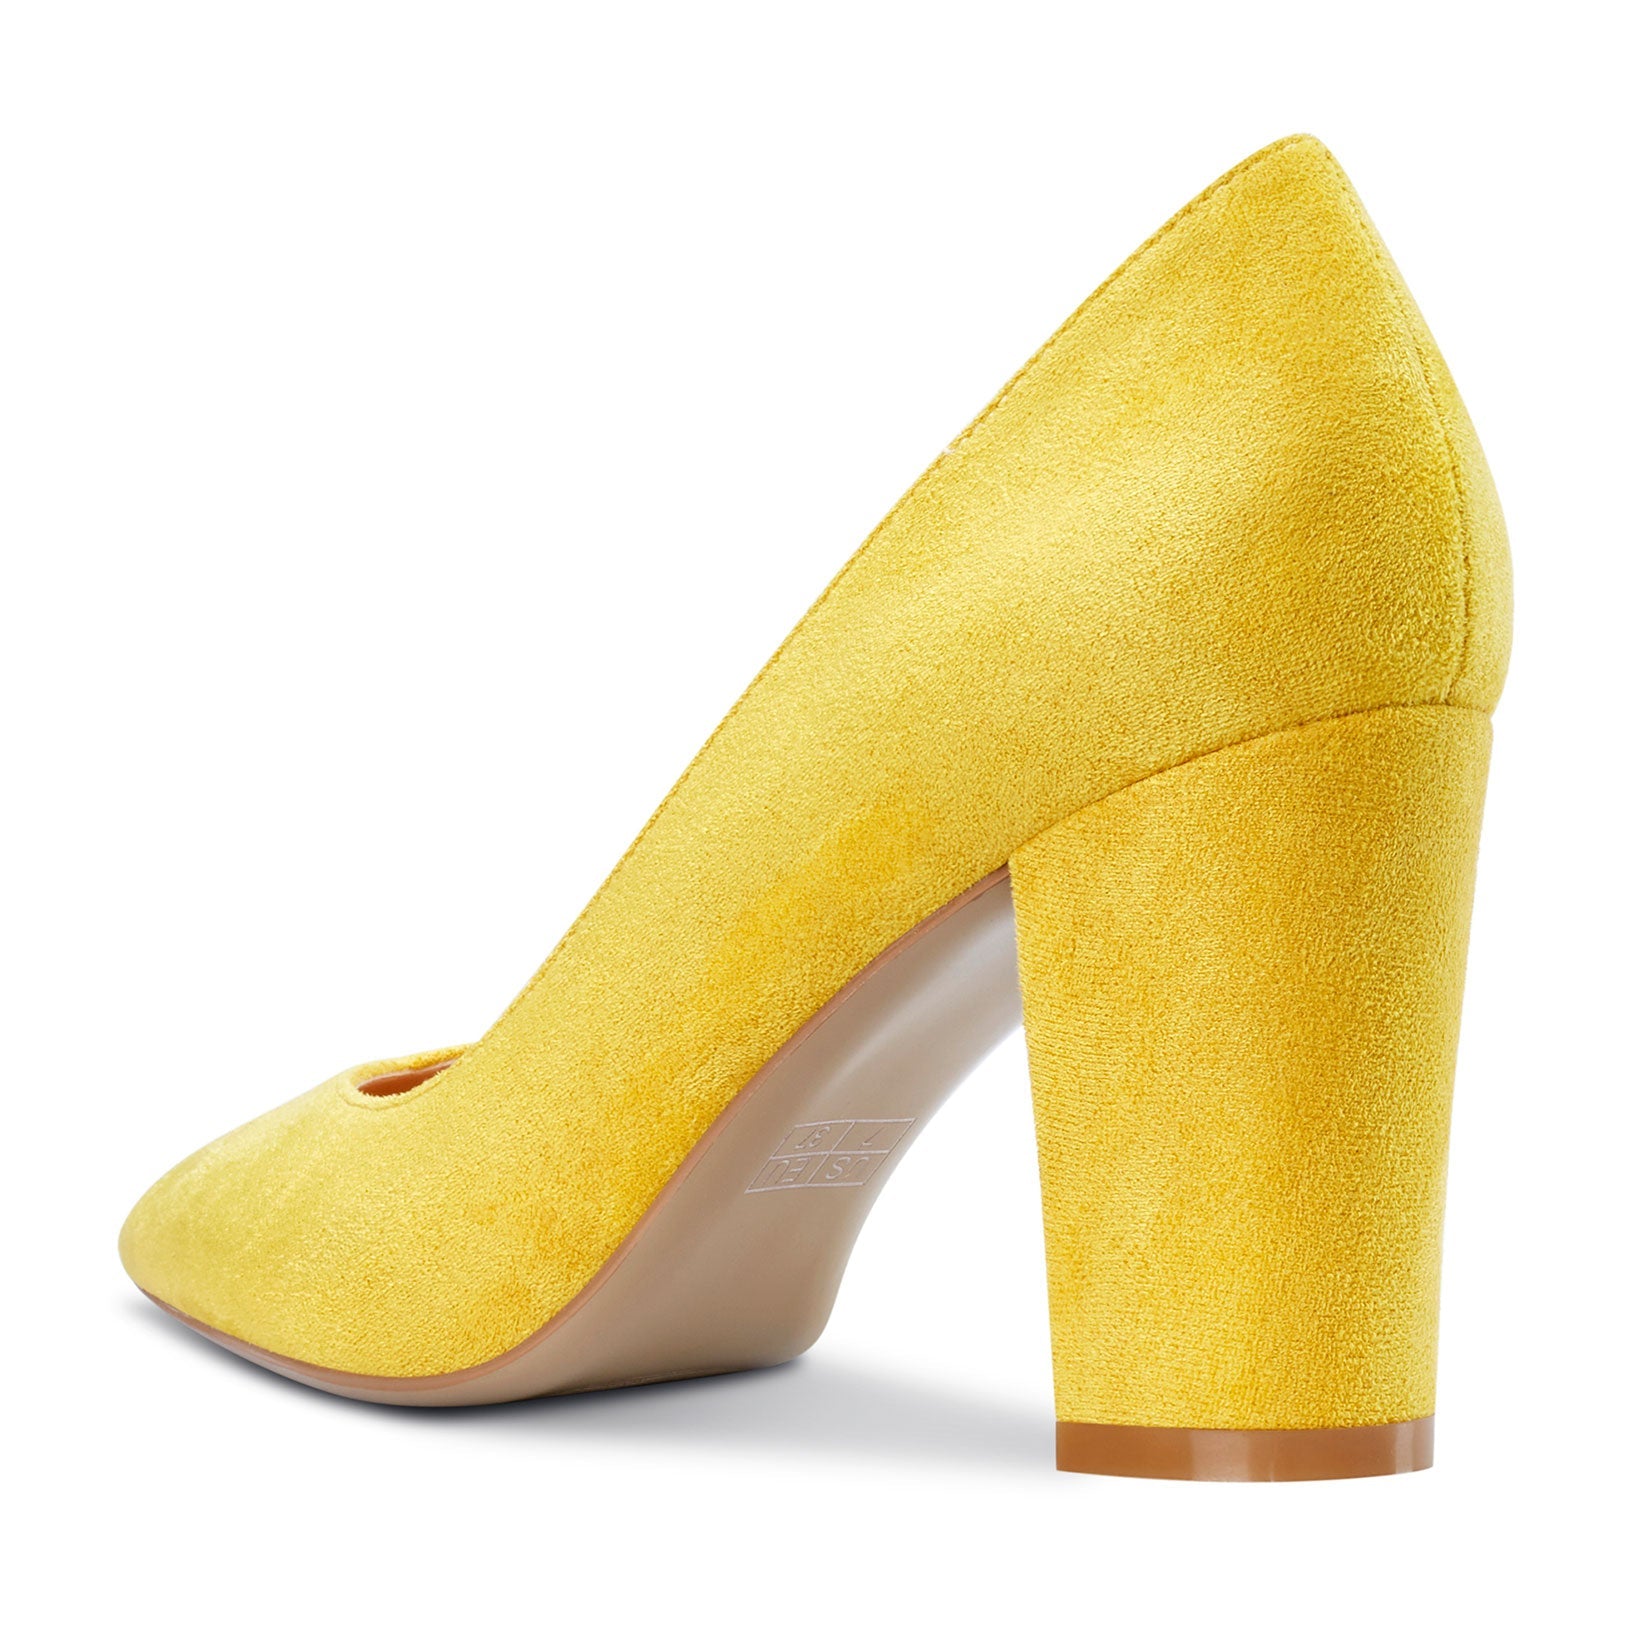 Fashionable Ankle Strap Pumps For Women, Yellow Cross Strap Stiletto Heeled  Pumps | SHEIN USA